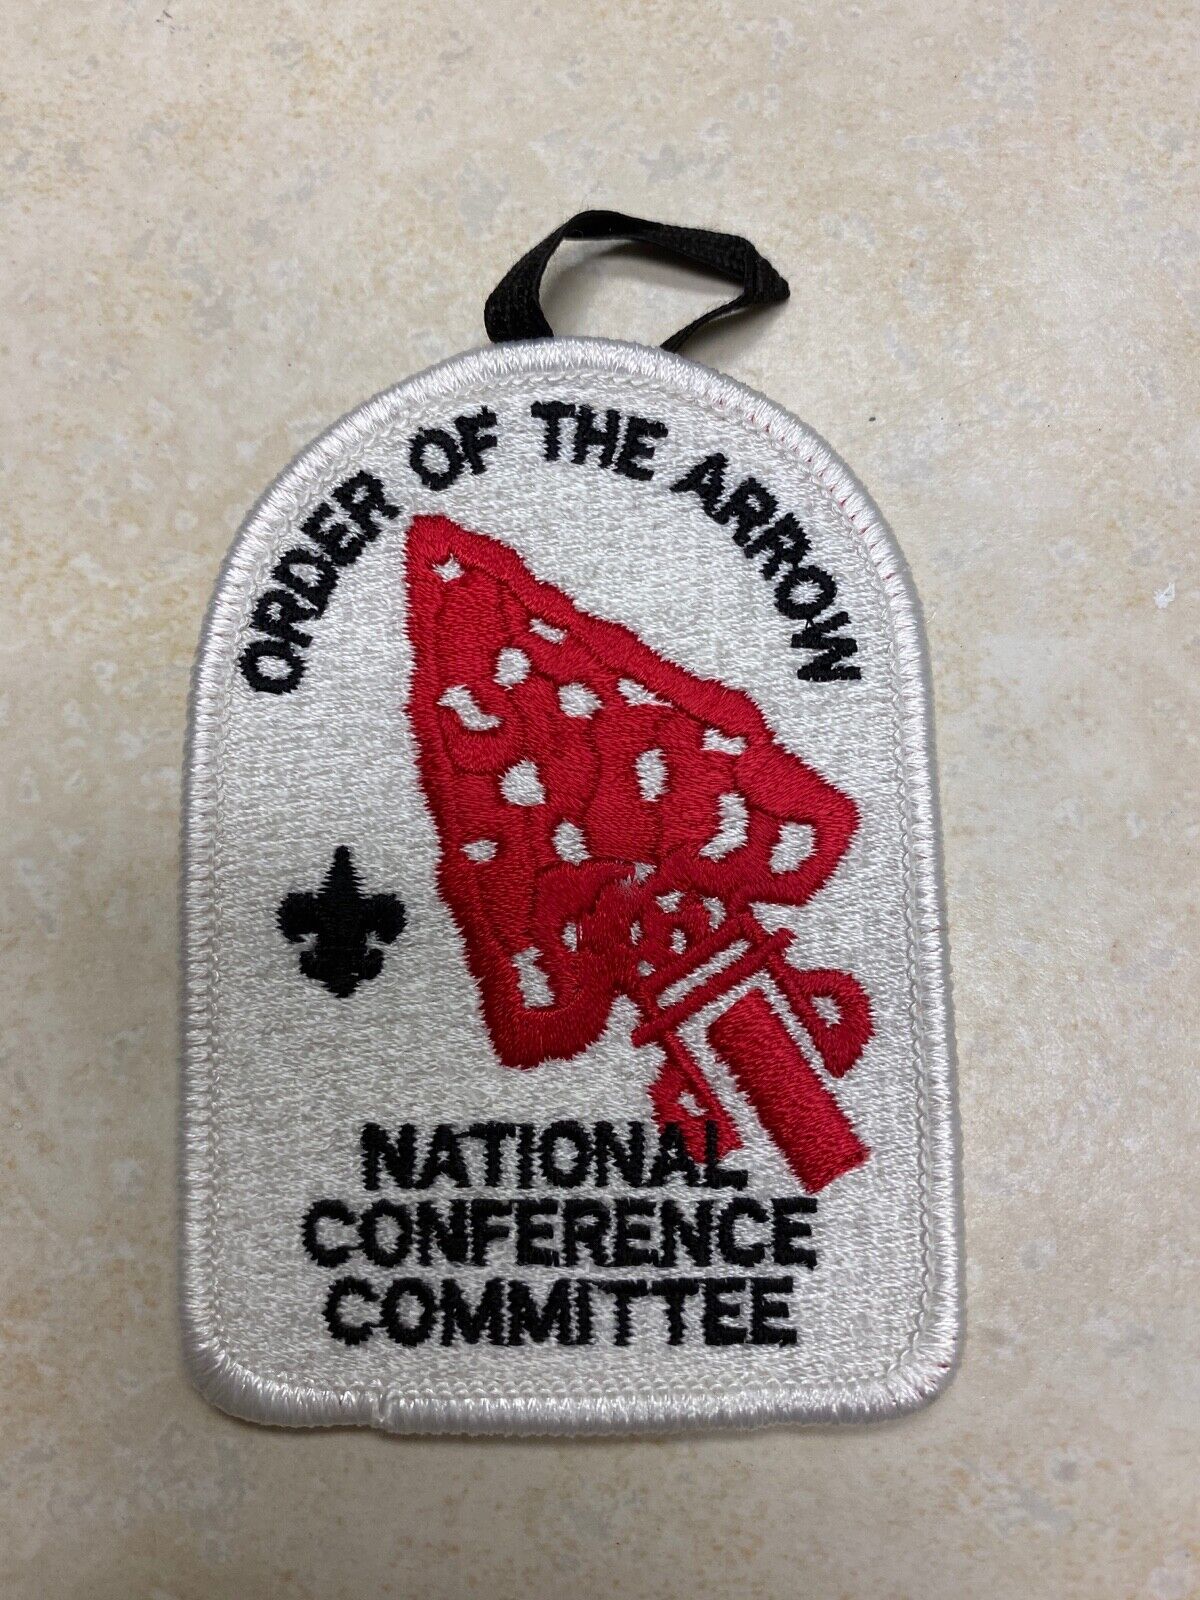 Order of the Arrow National Conference Committee Patch